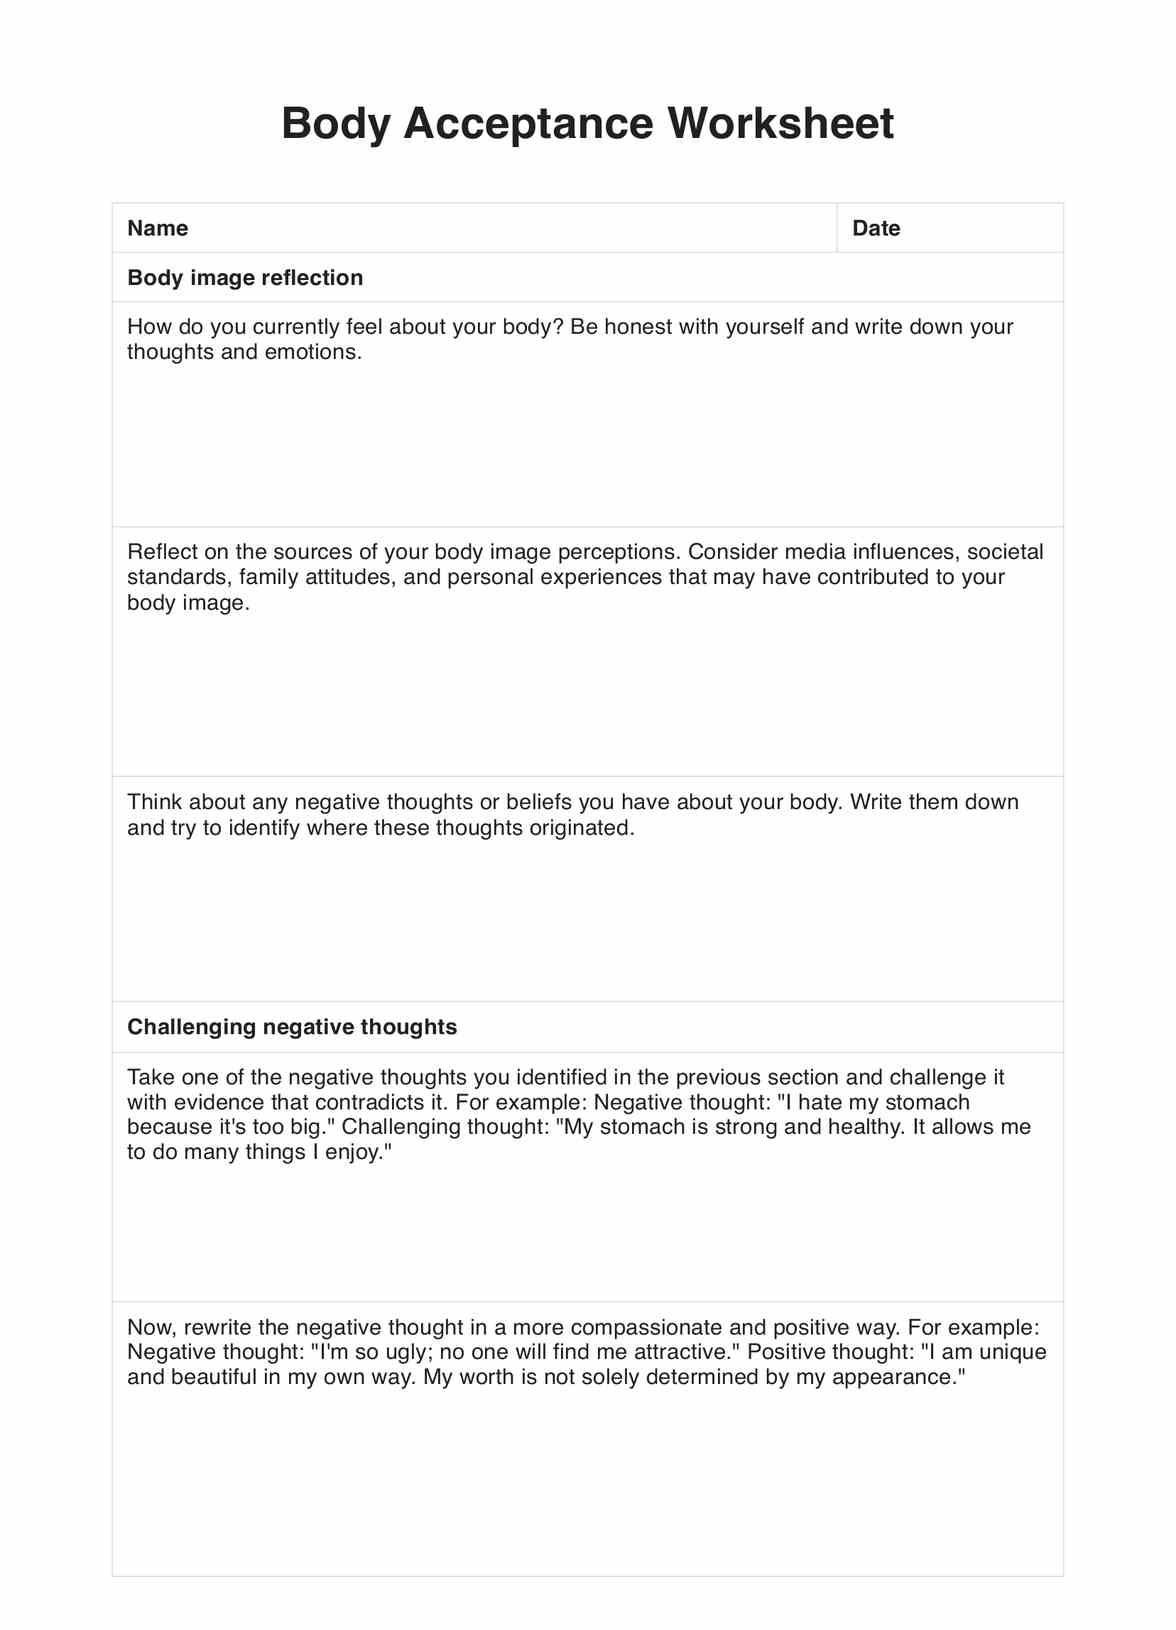 Body Acceptance Worksheets PDF Example